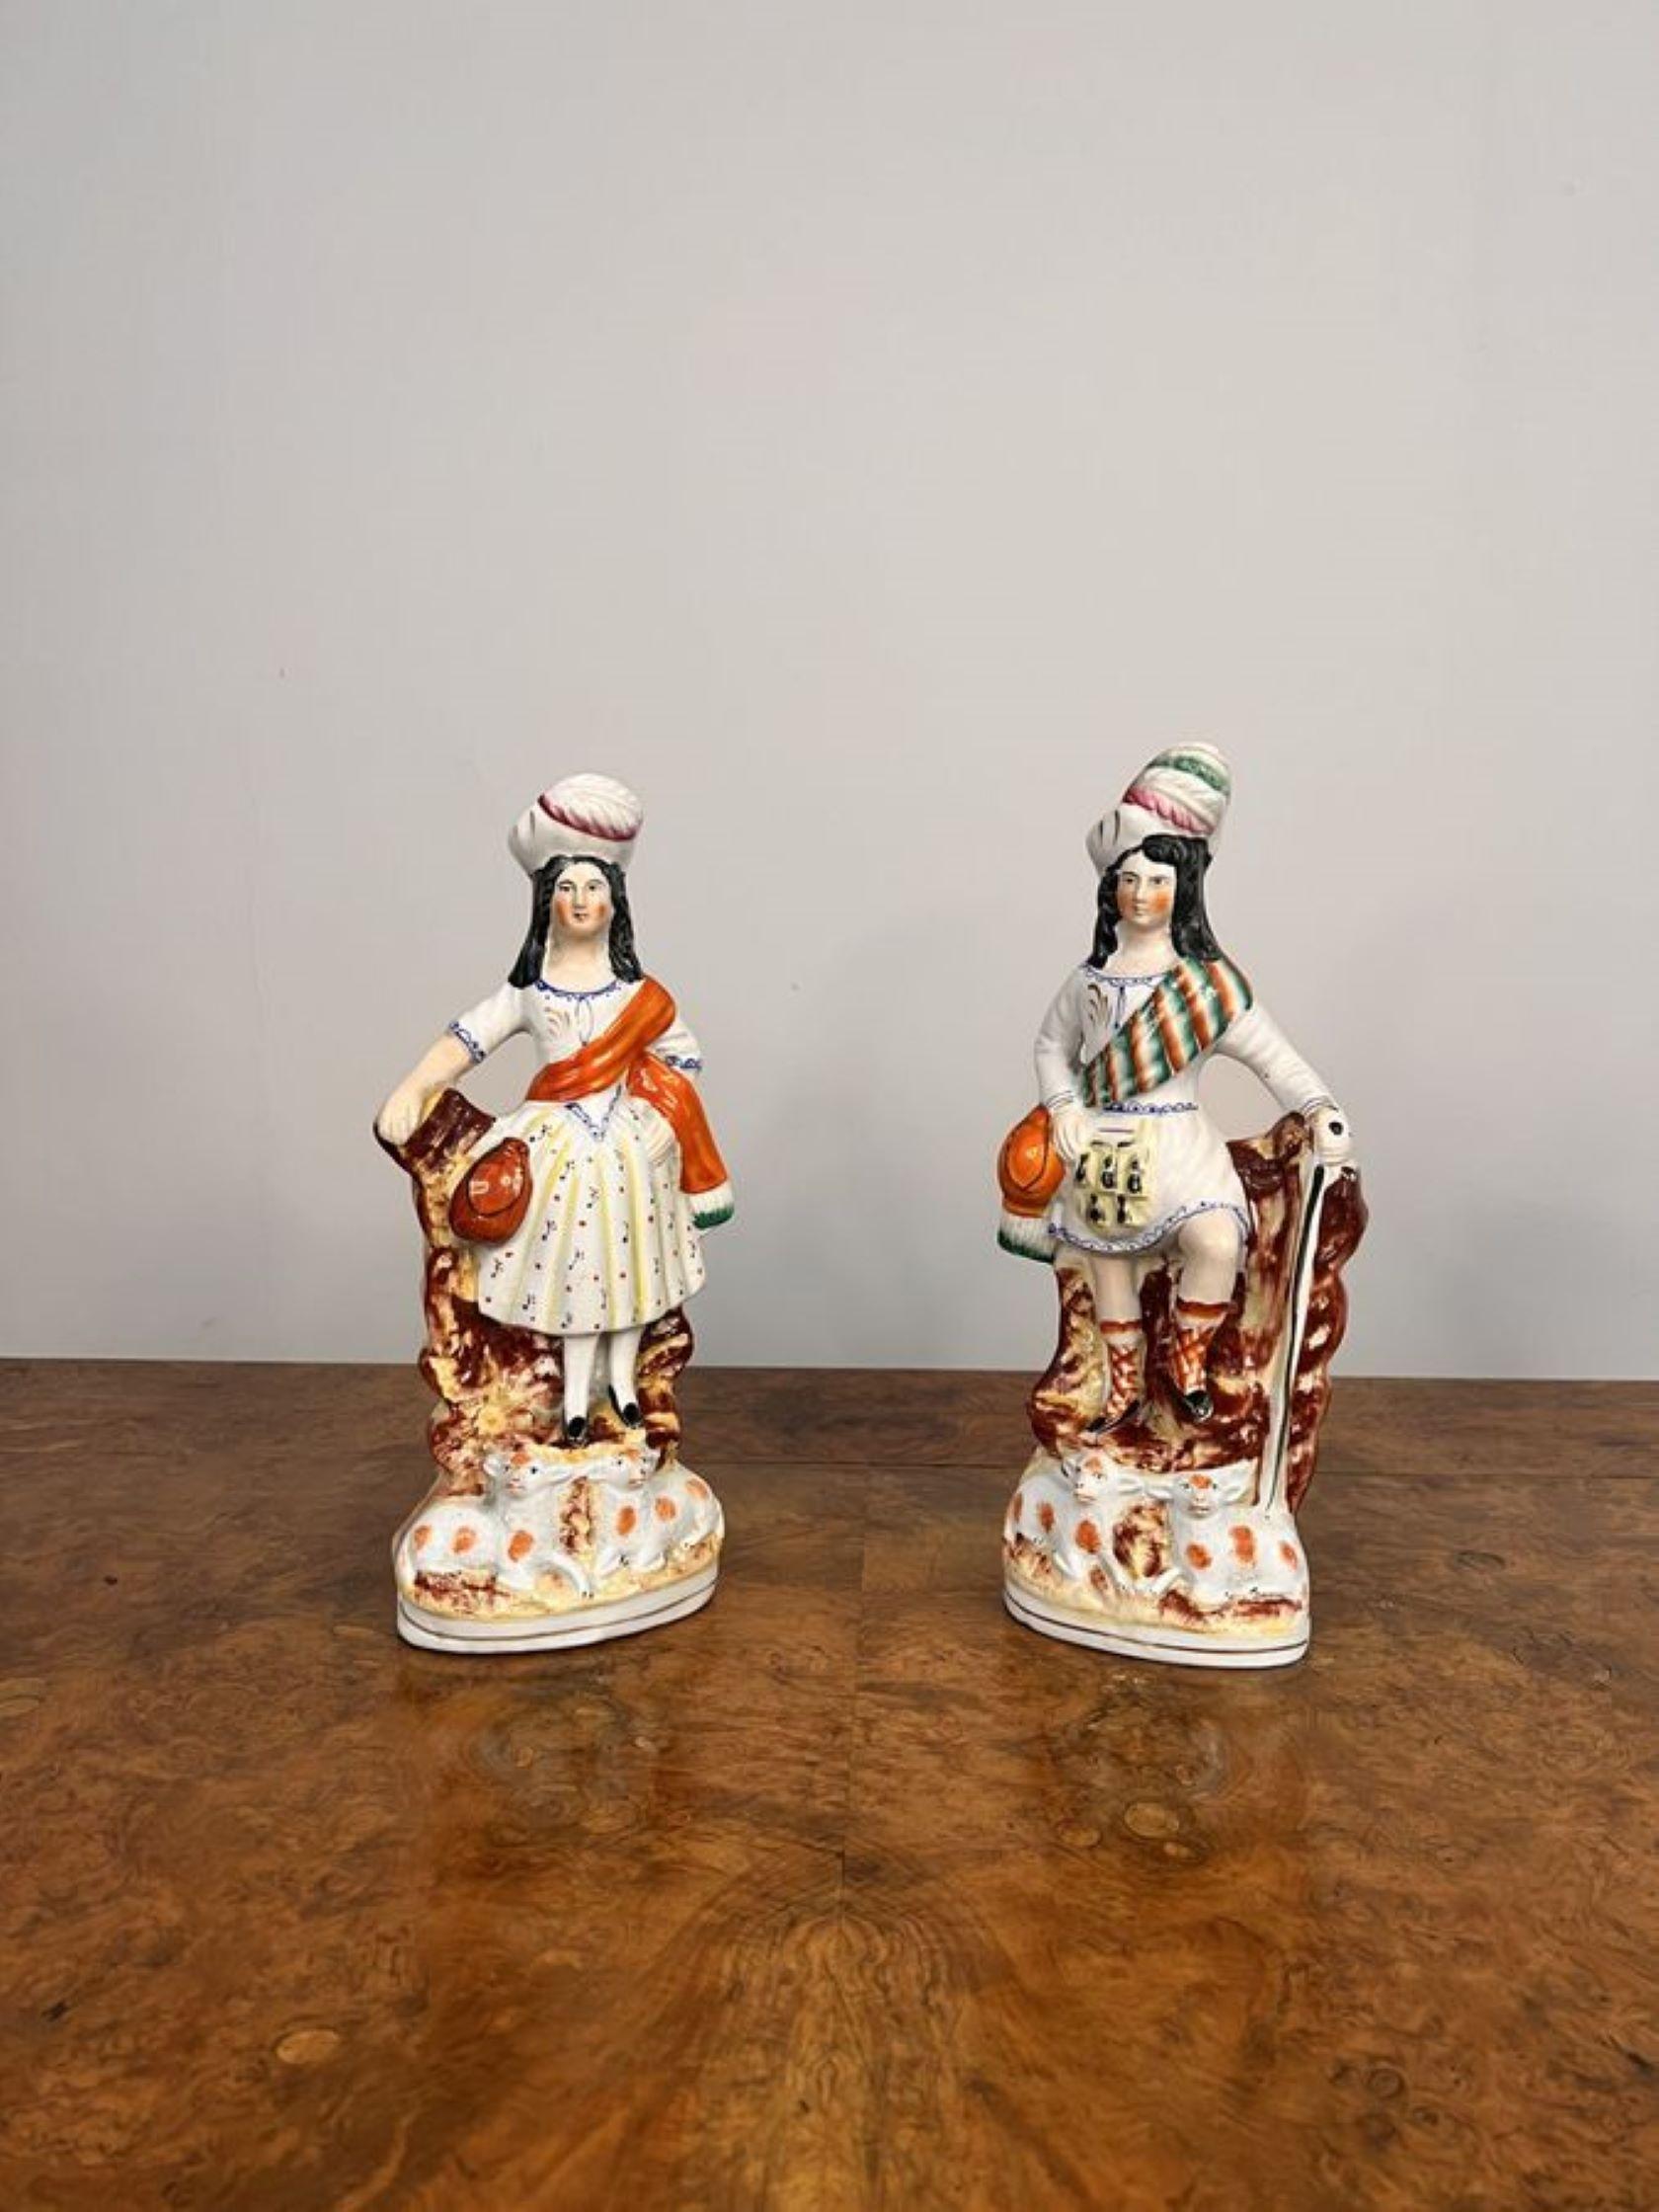 Quality pair of antique Victorian Staffordshire highland figures having a quality pair of antique Victorian staffordshire highland figures in traditional clothing hand painted in wonderful green, brown, pink and white colours standing above two